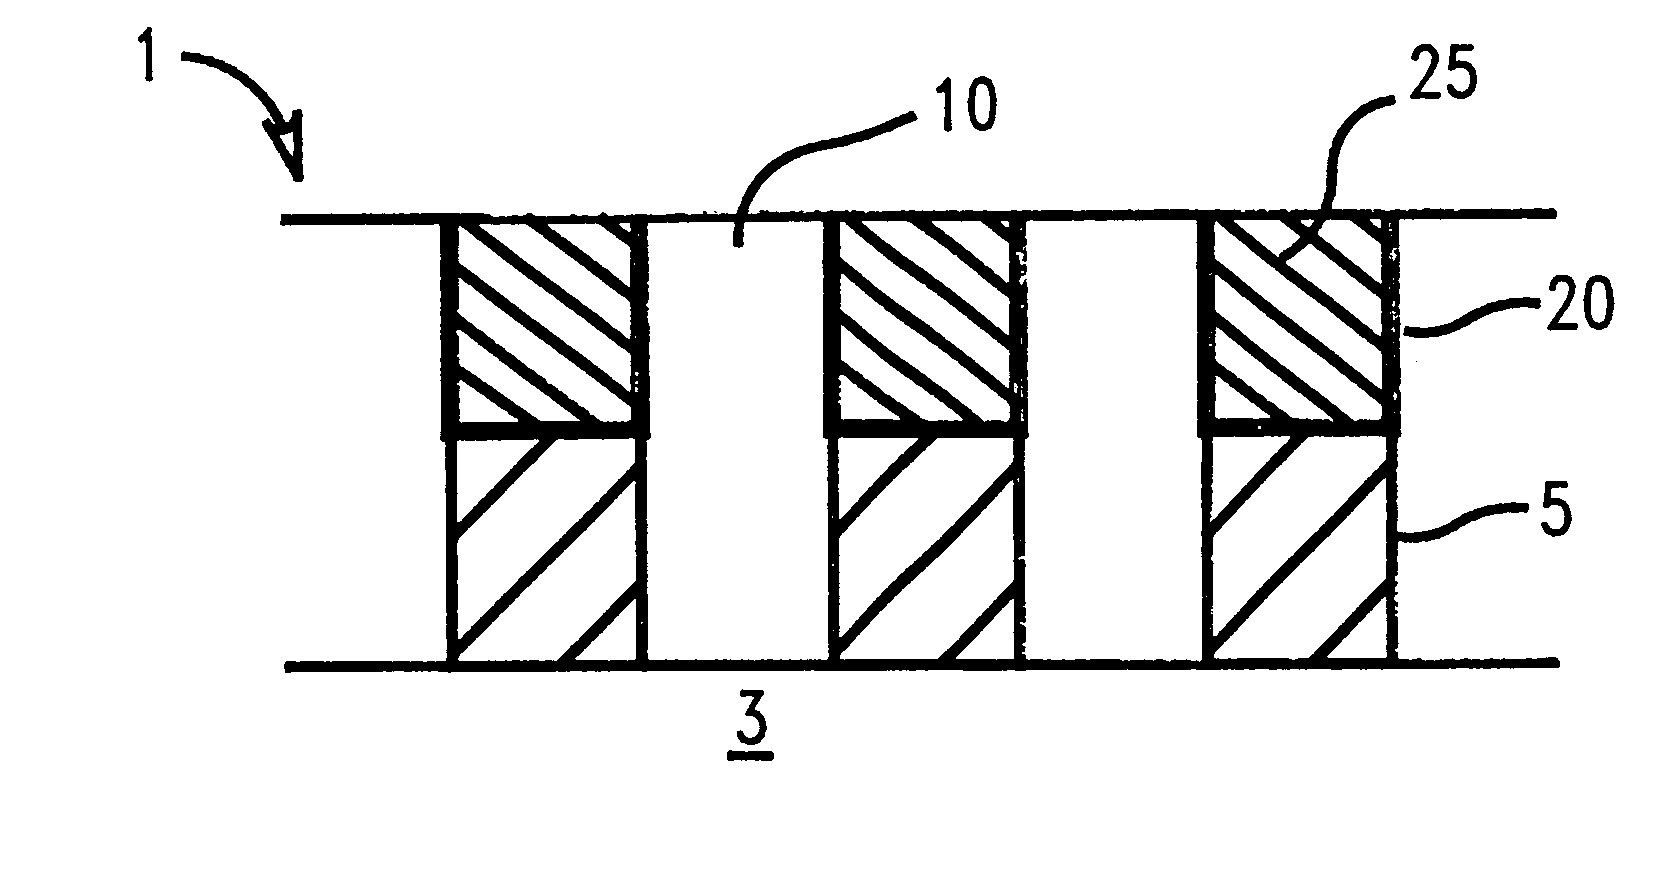 Sputtered tungsten diffusion barrier for improved interconnect robustness